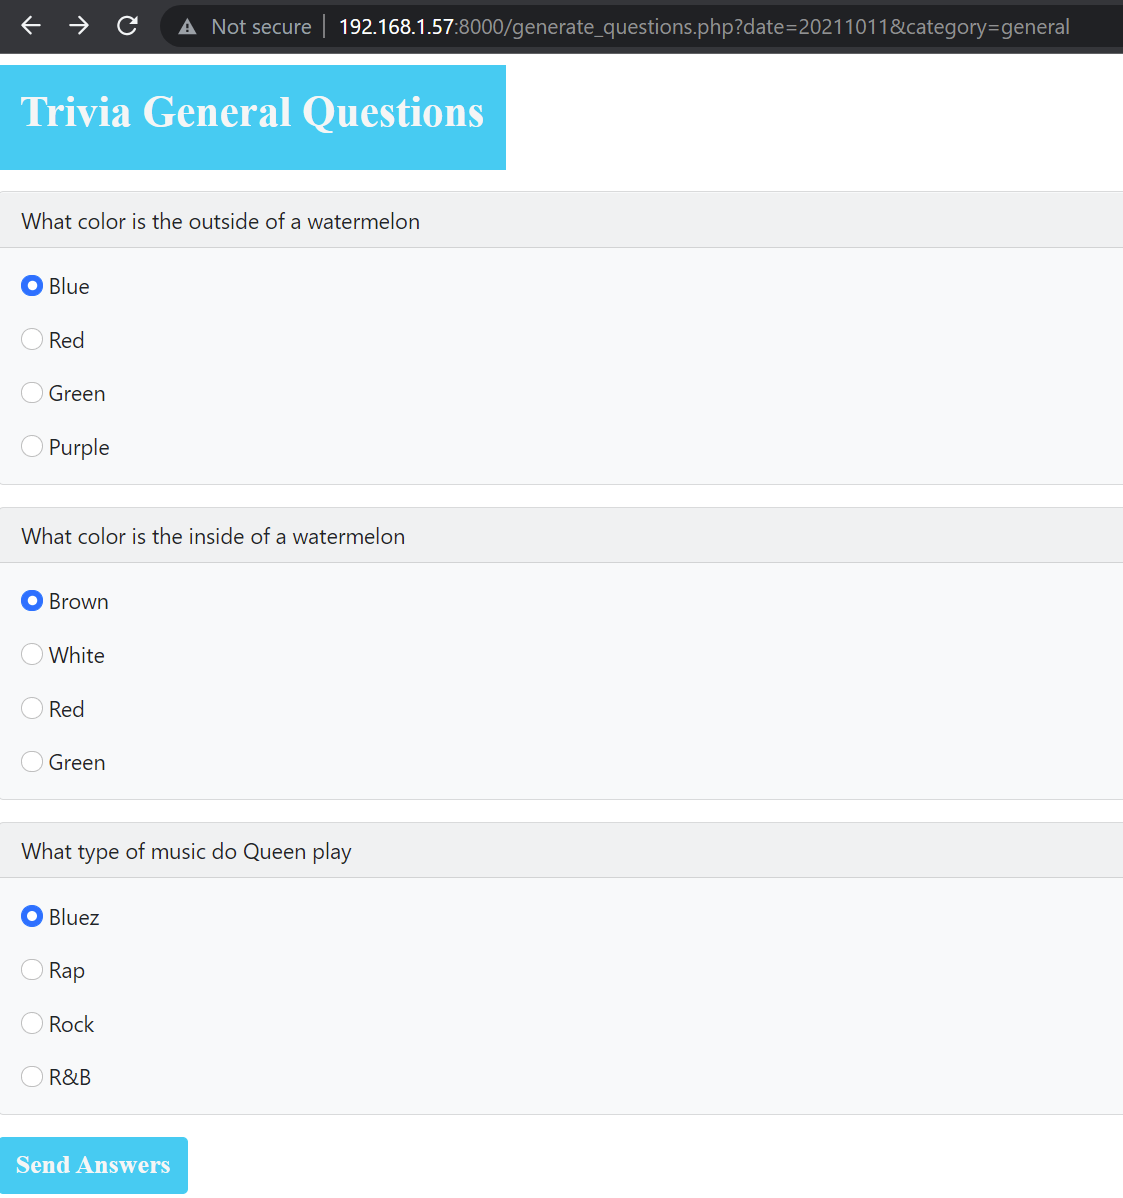 How to make a Trivia Game in PHP